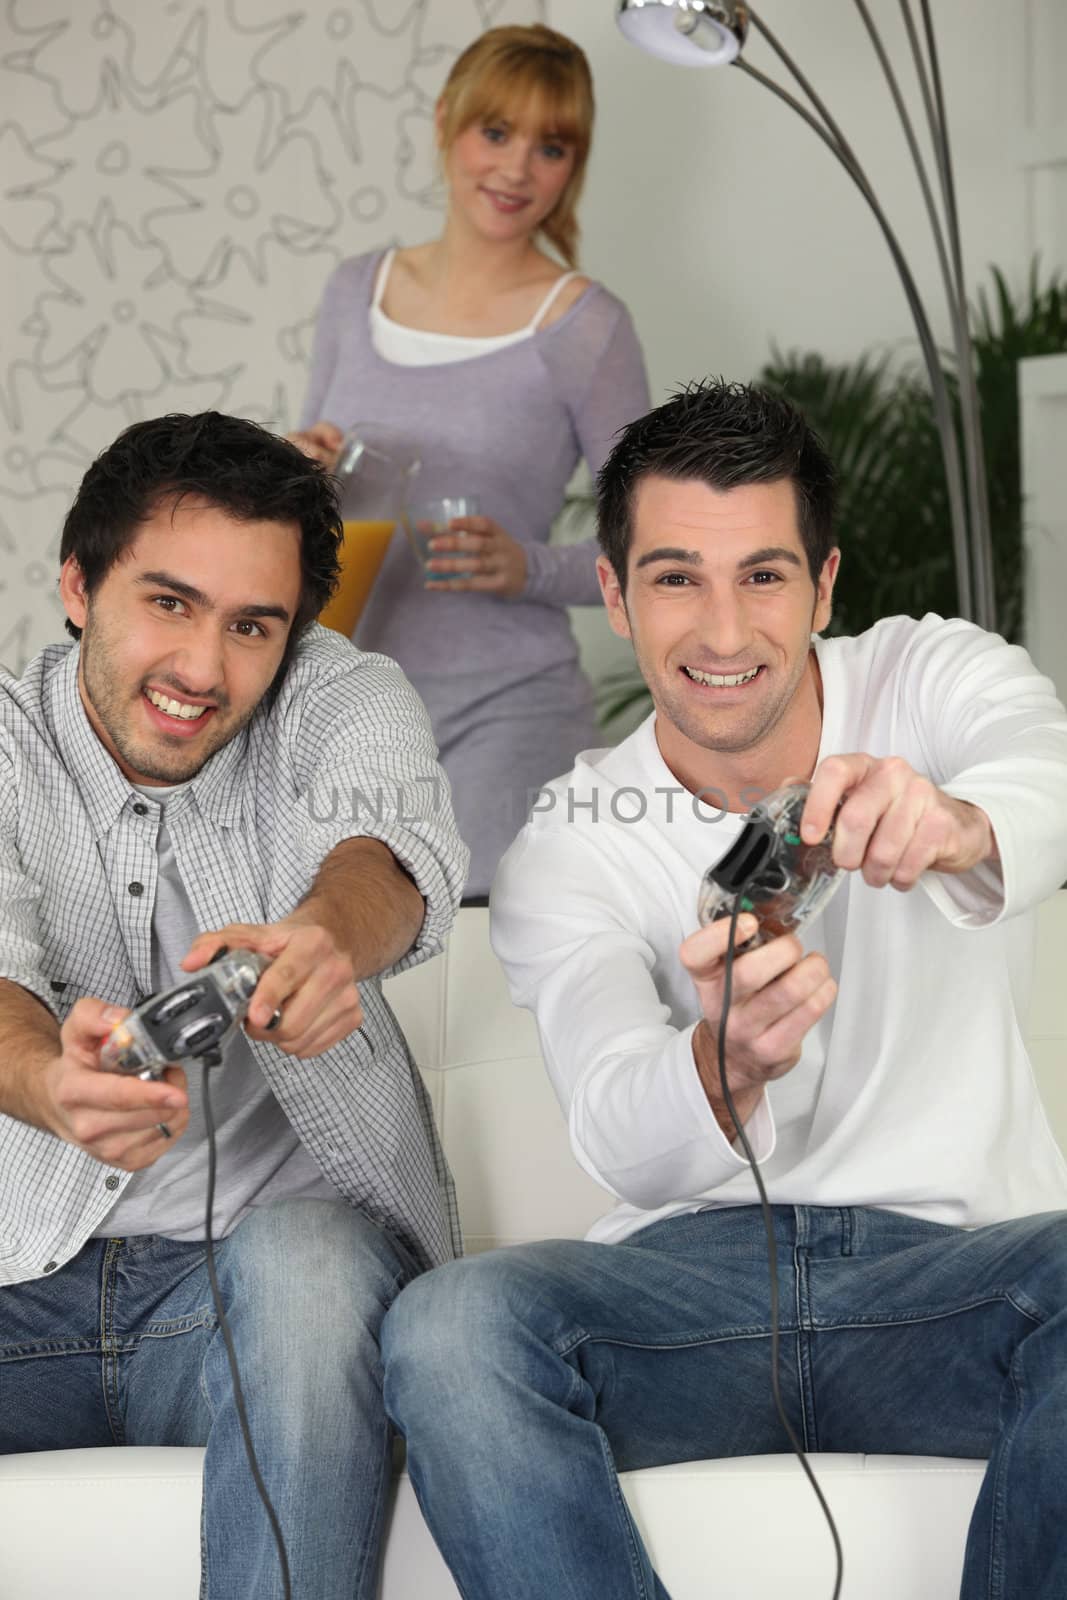 men playing video games by phovoir